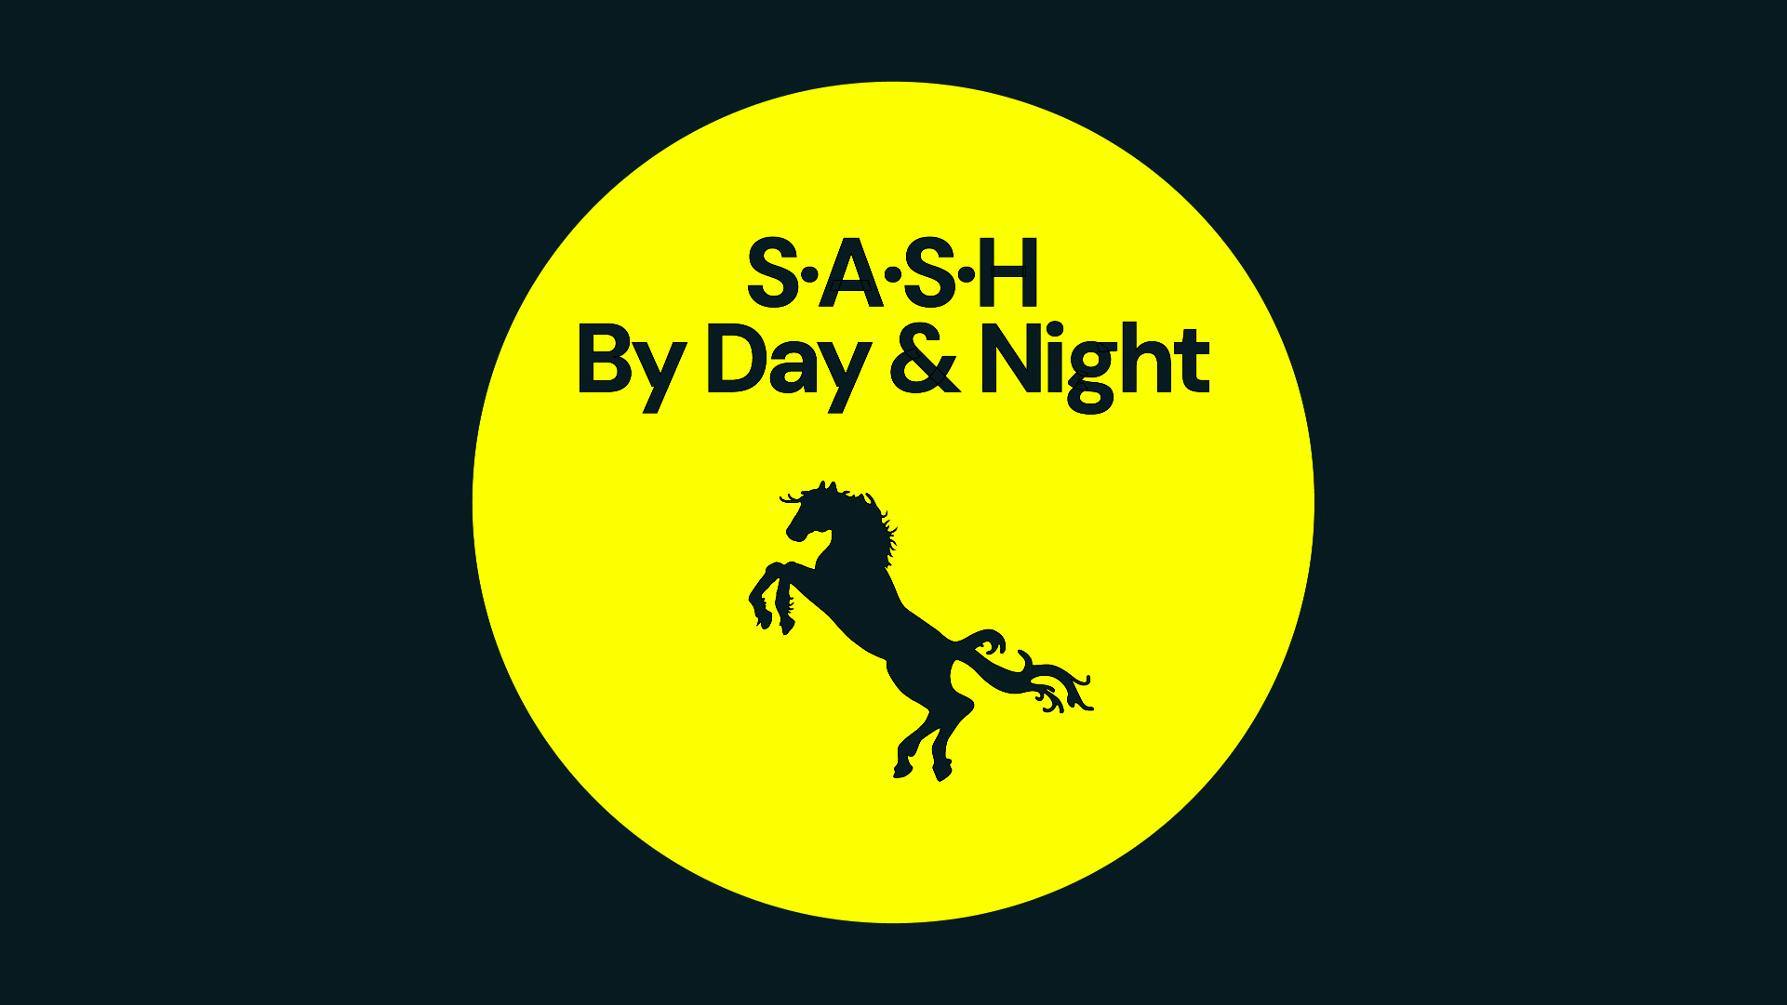 ★ S.A.S.H By Day & Night ★ Sunday 28th July ★